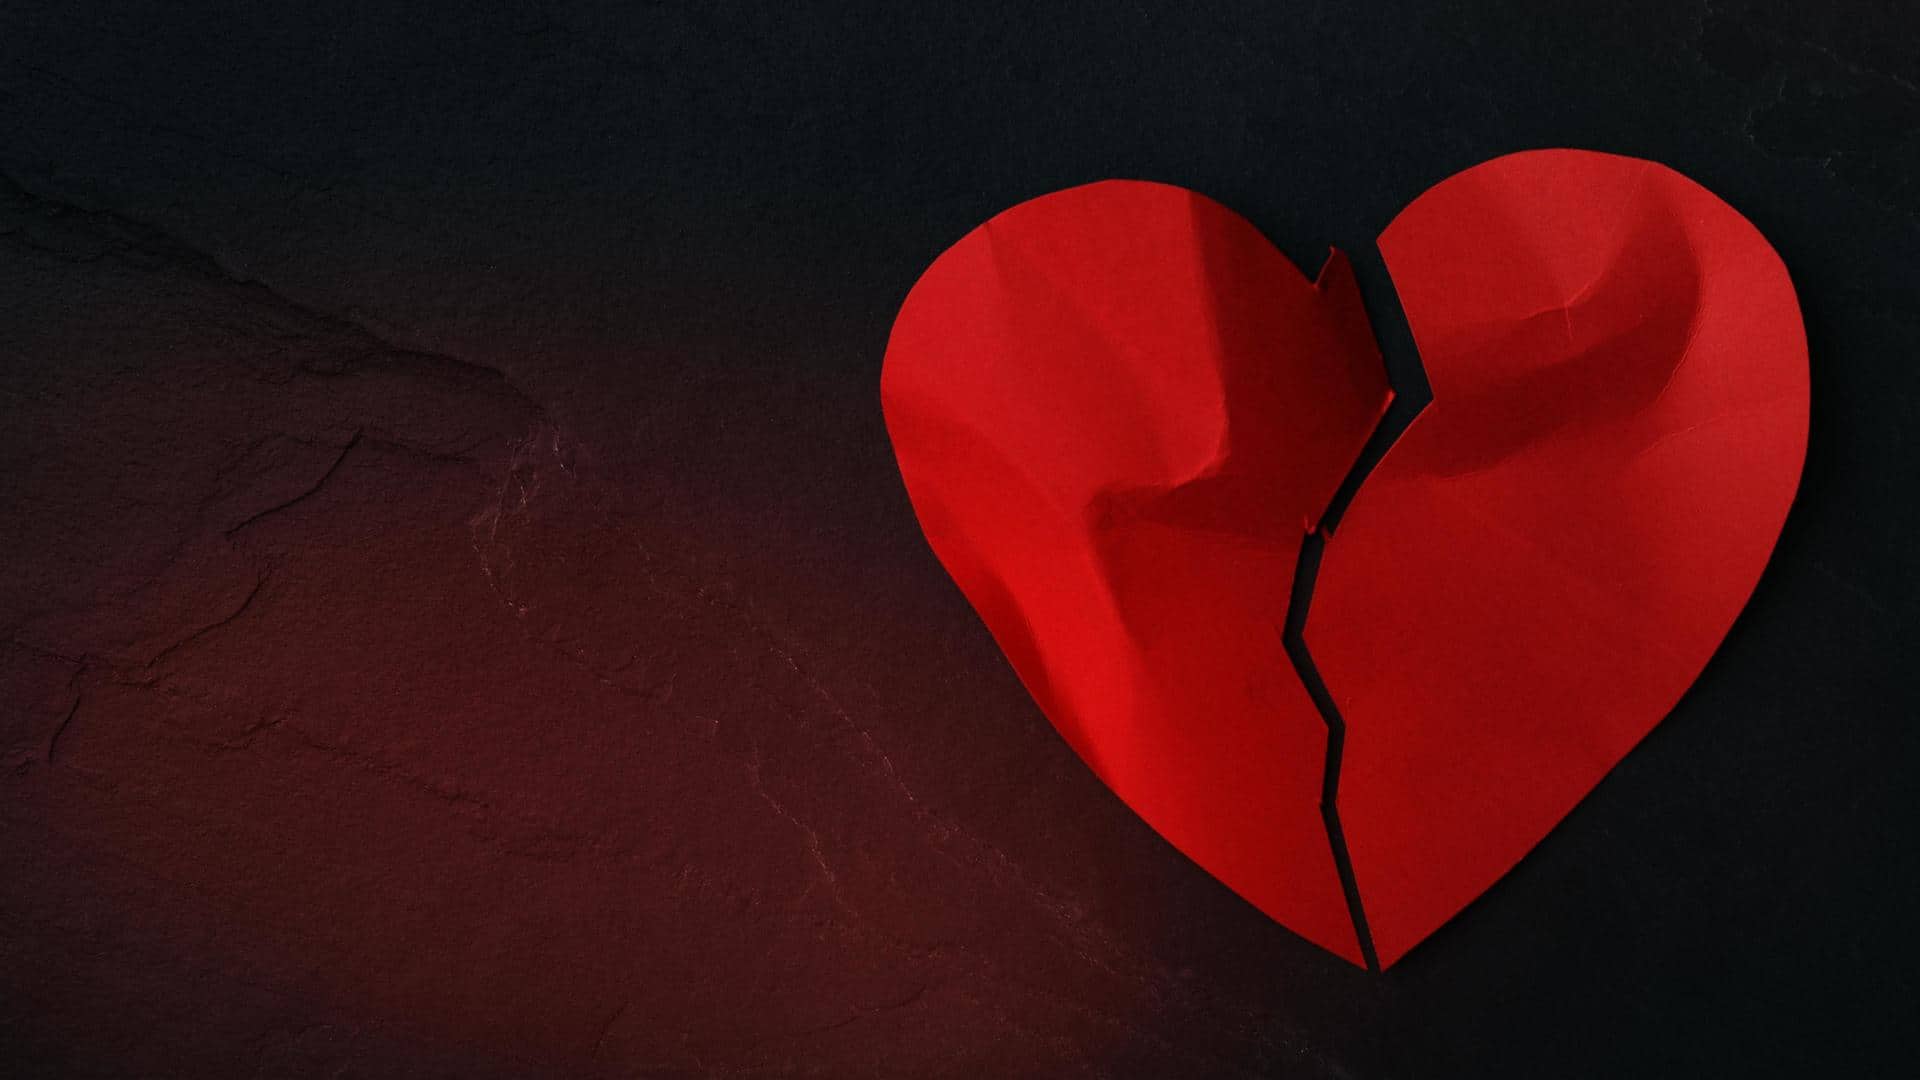 Going through a heartbreak? Here's how to cope with it